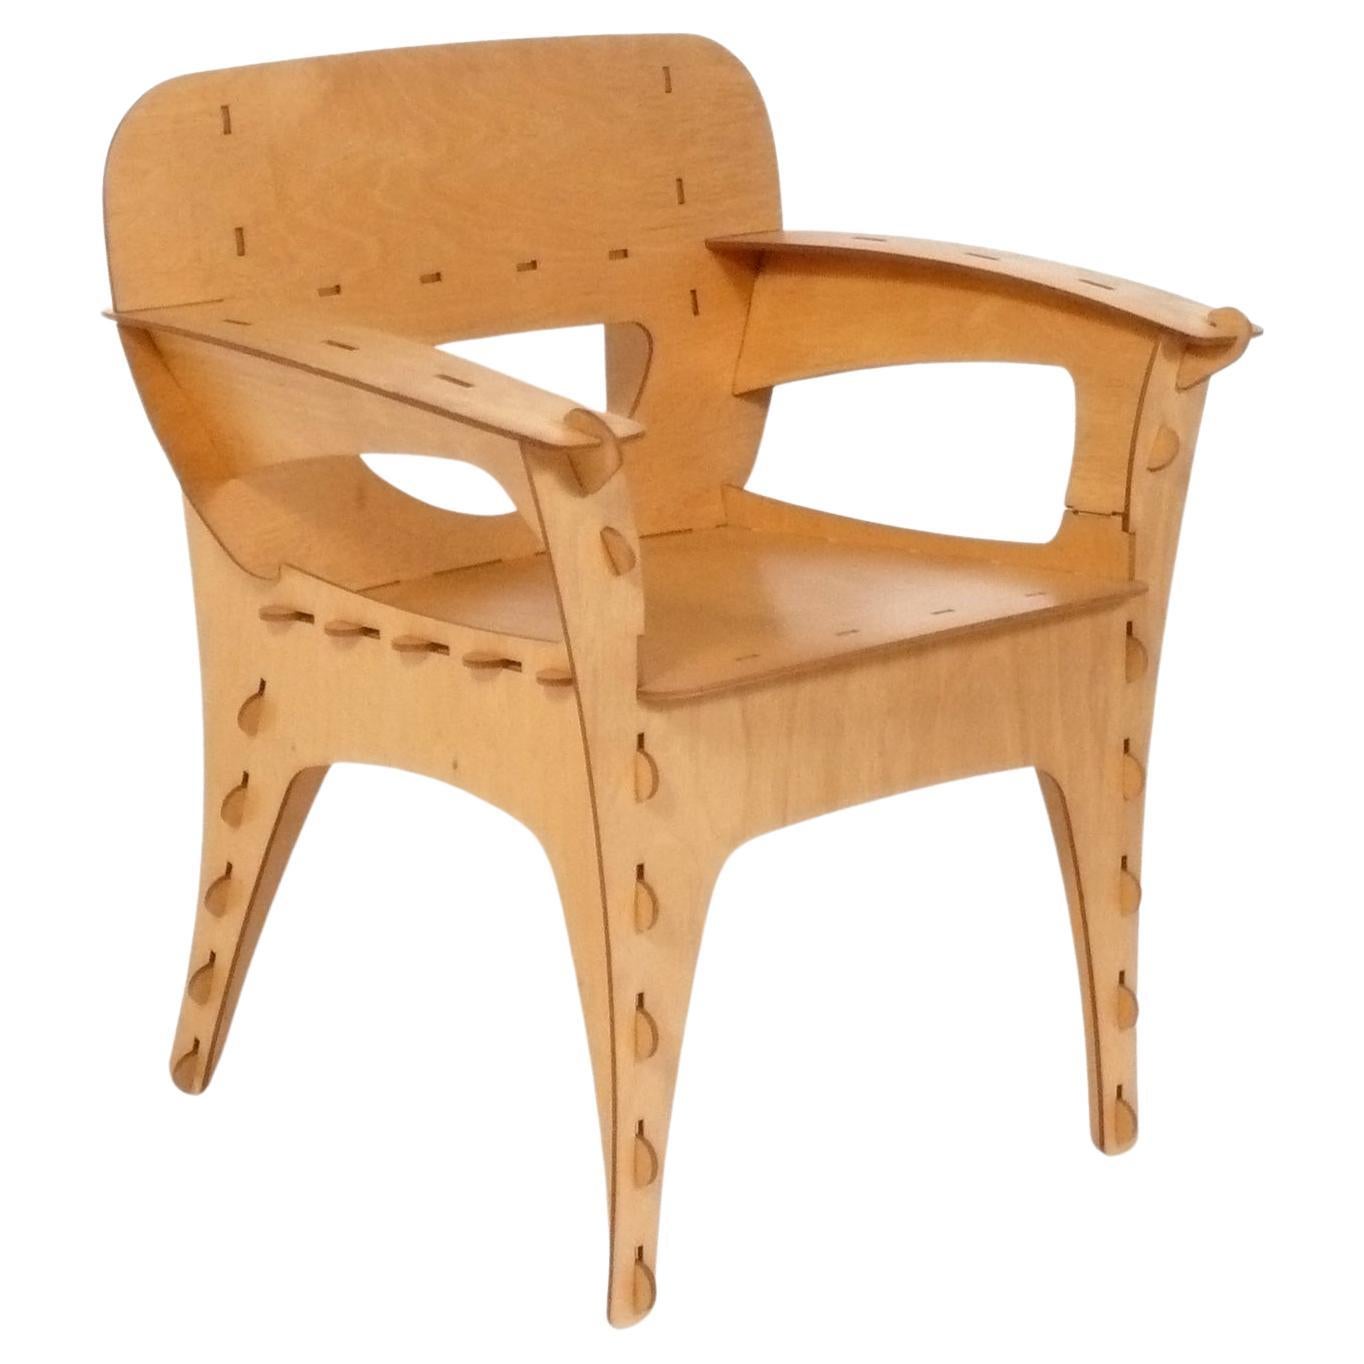 Sculptural Plywood Puzzle Chair by David Kawecki Great Original Patina, 1990s For Sale